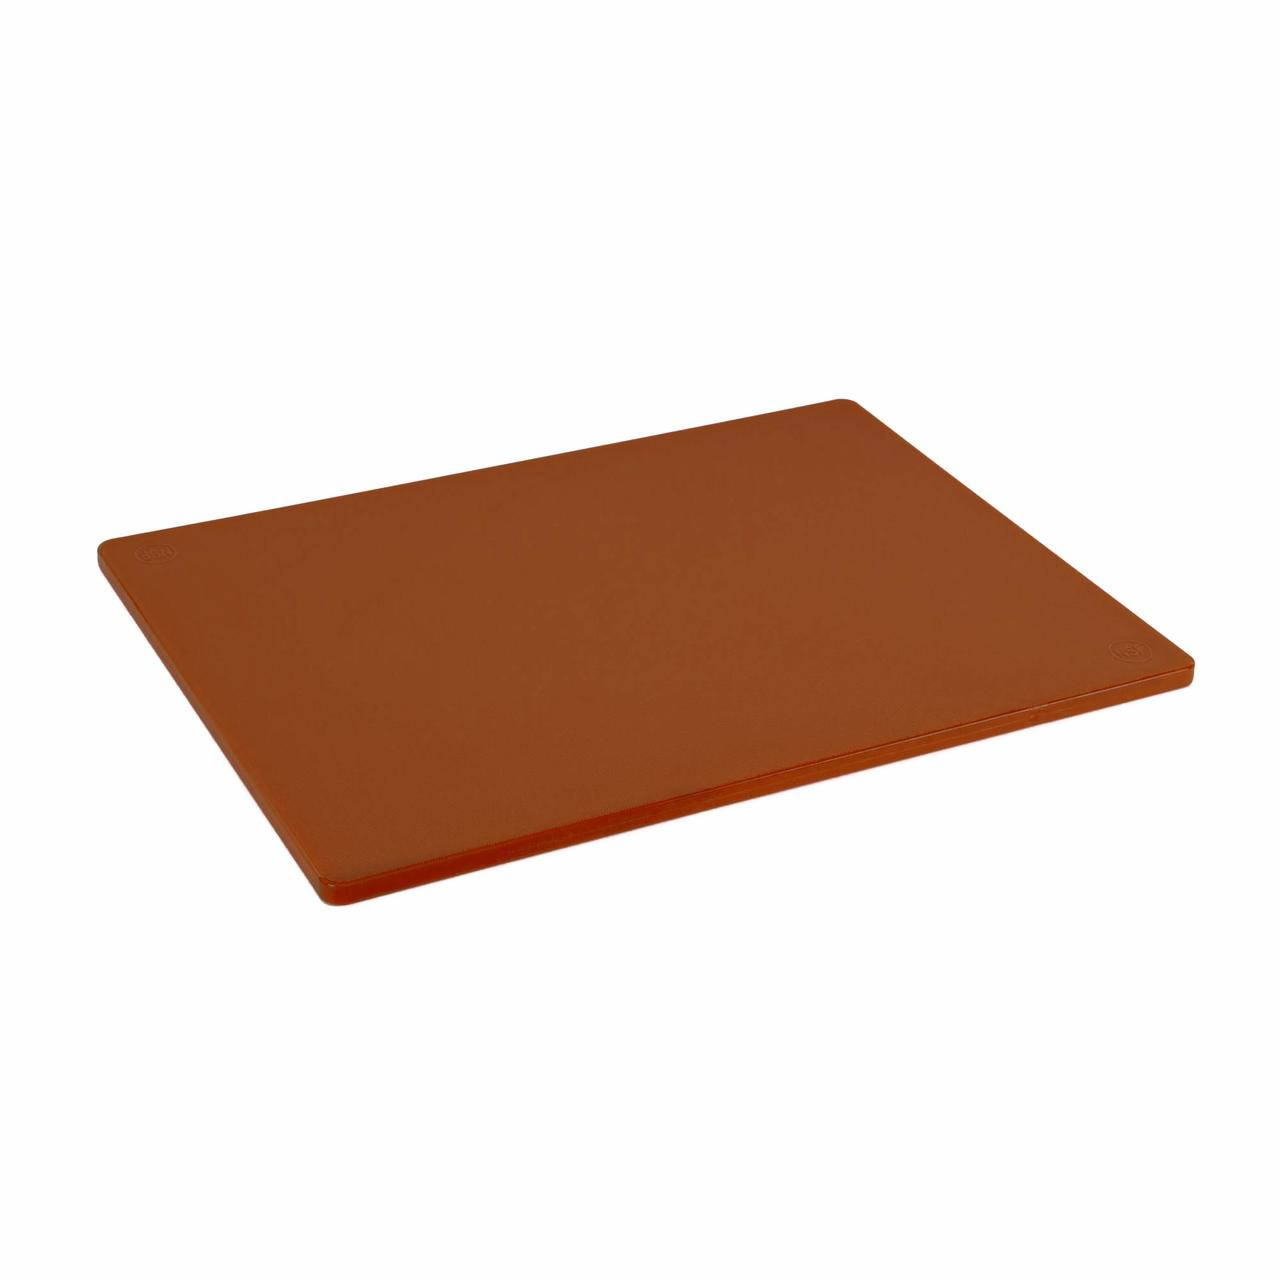 12 x 18 Economy Brown Poly Cutting Board - Cutting Board Company -  Commercial Quality Plastic and Richlite Custom Sized Cutting Boards